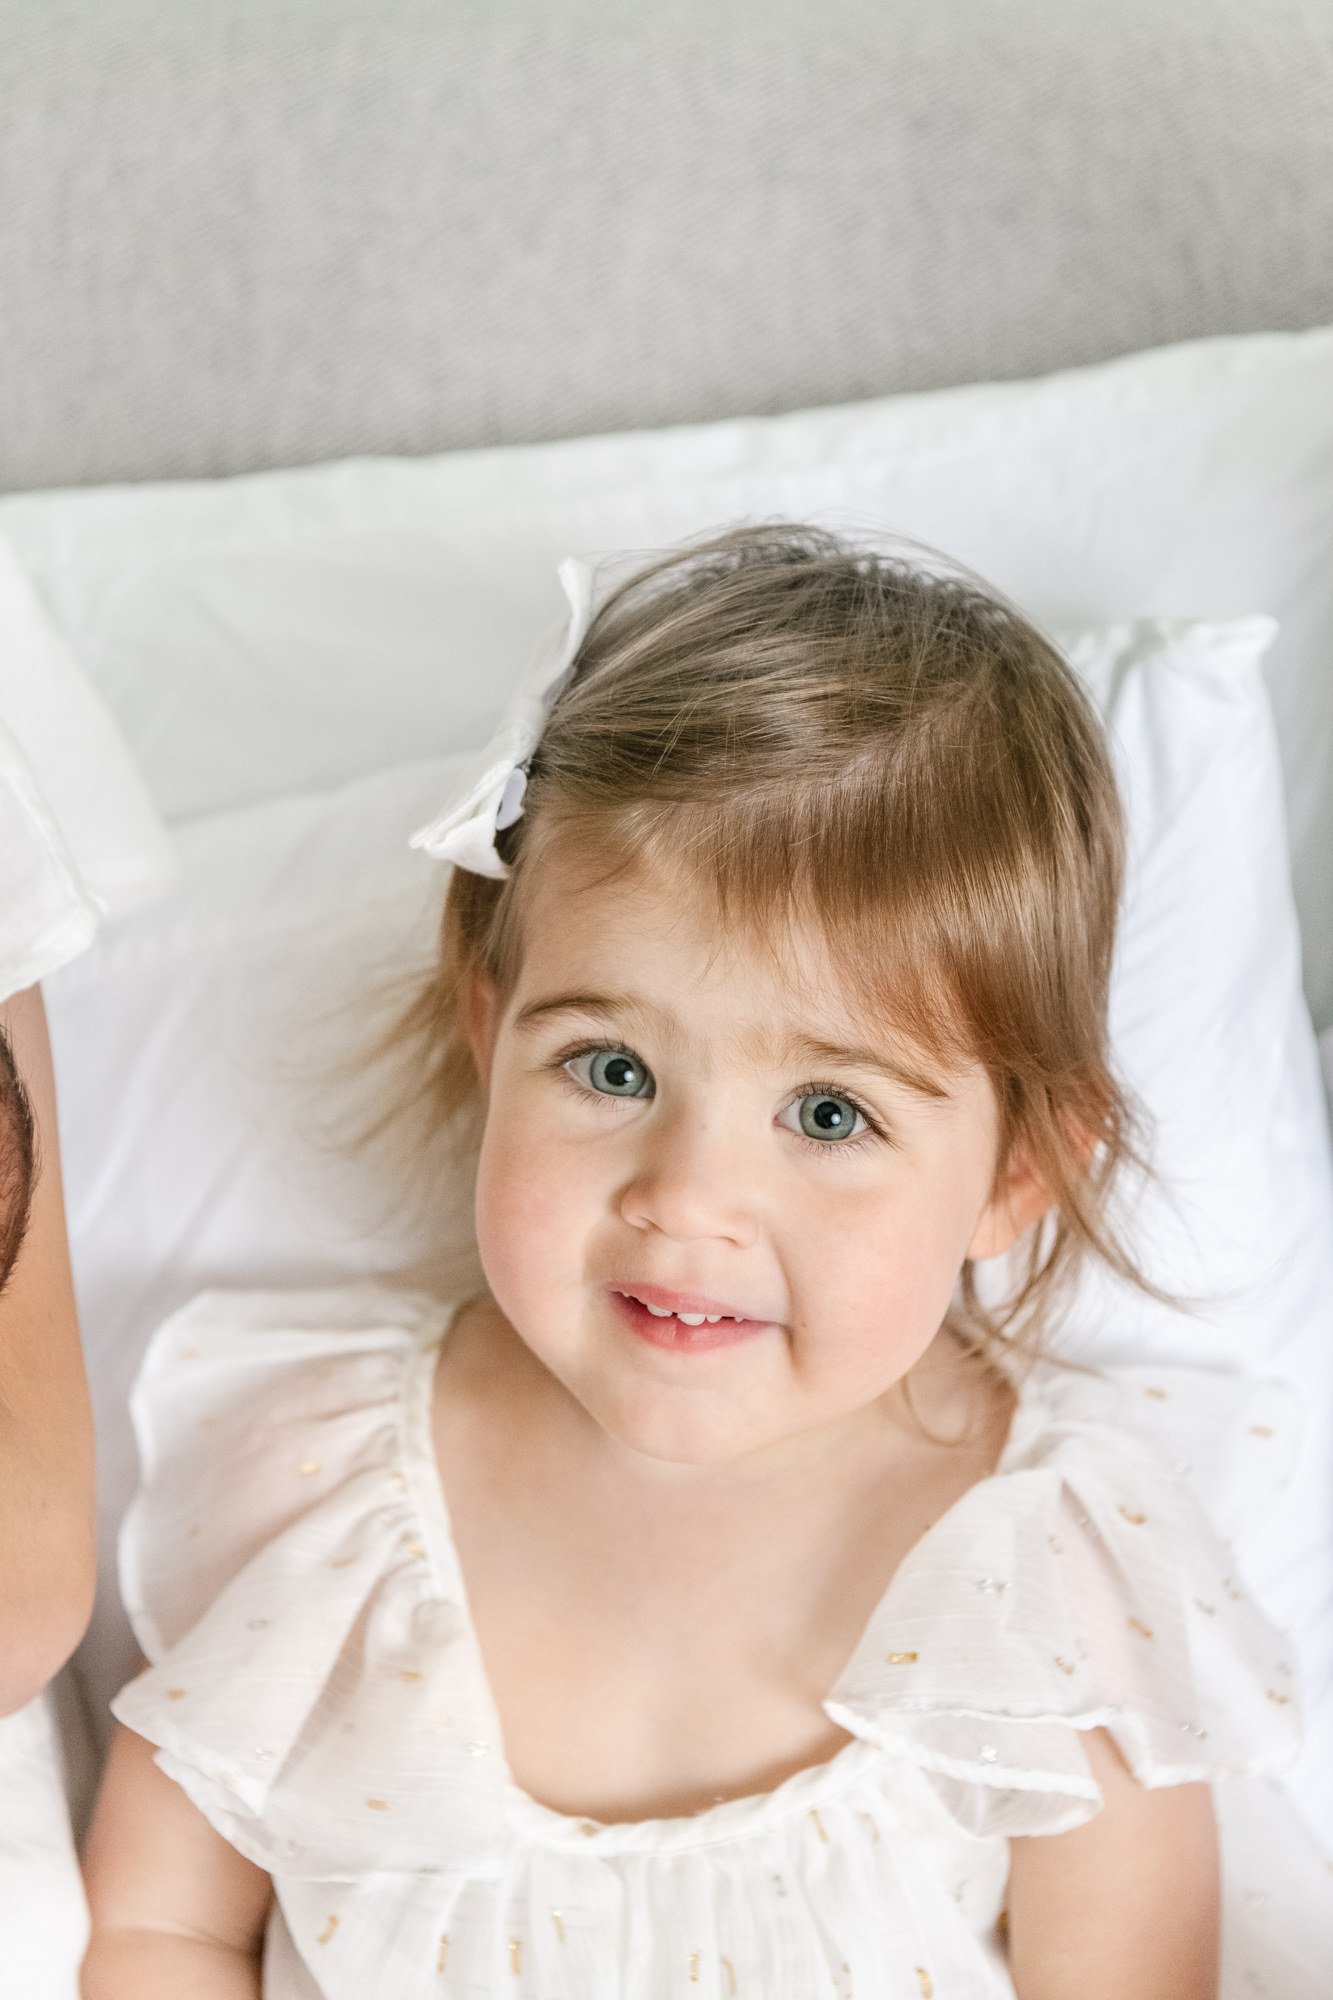  Sweet toddler girl around two years old smiles up at the camera with her beautiful big blue eyes while wearing a feminine white dress. #candidposeinspo #newbornphotography #shorthillsphotographer #familyphotographersinnewjersey #inhomeportraits #new